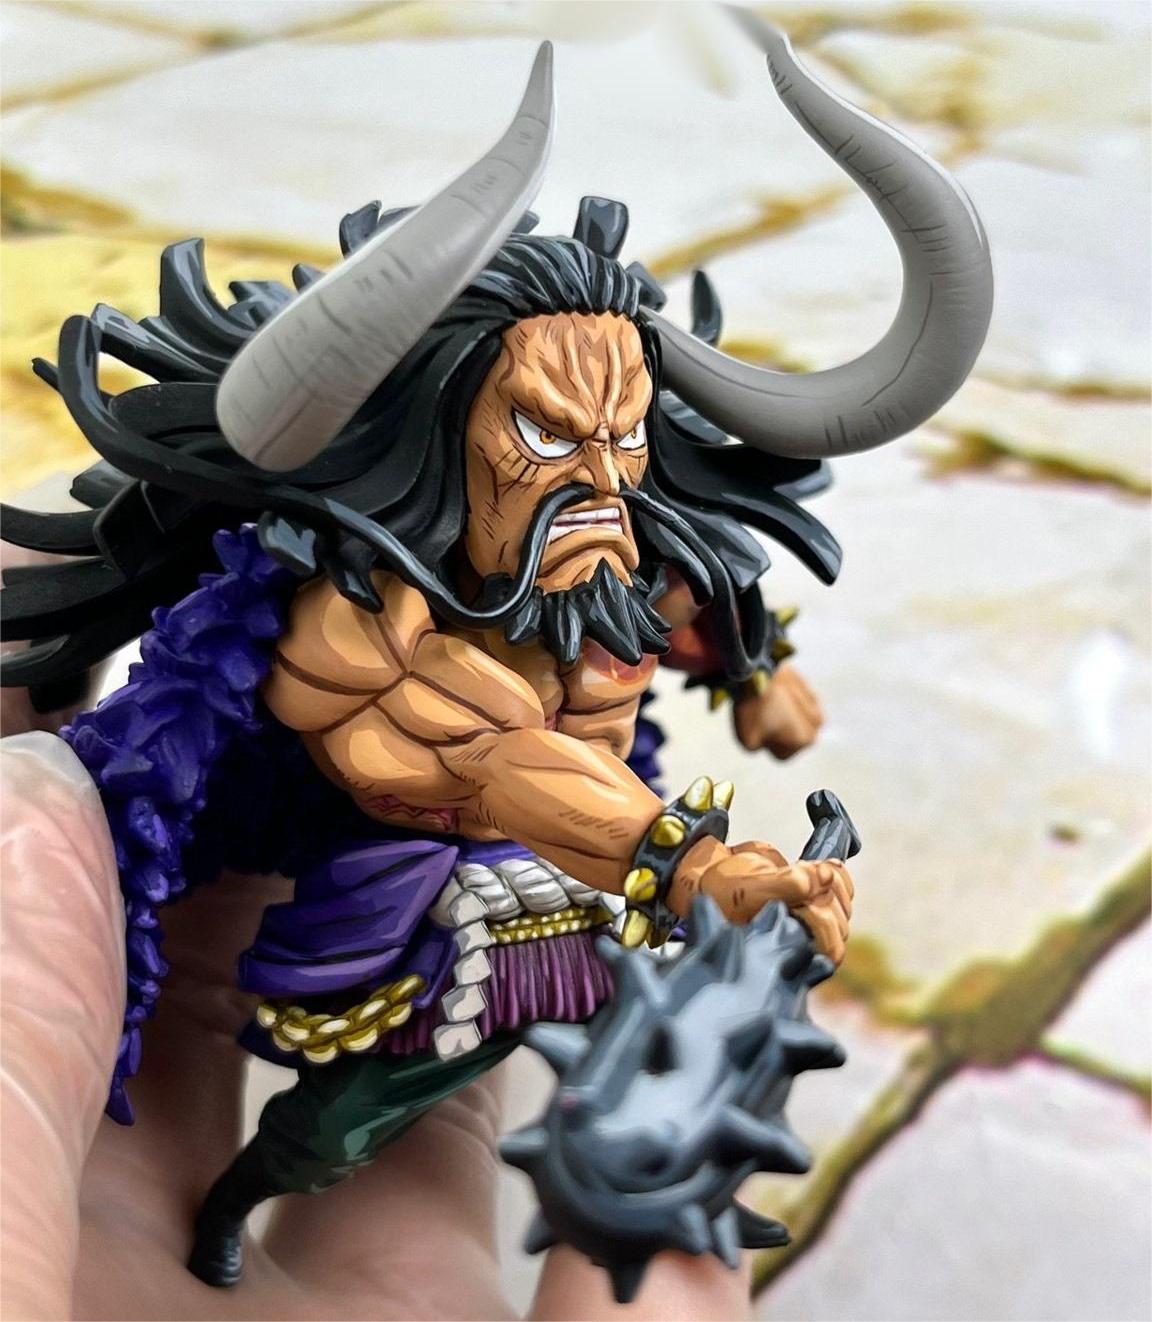 Repaint One Piece, Kaido in manga color, small scale - Lyk Repaint